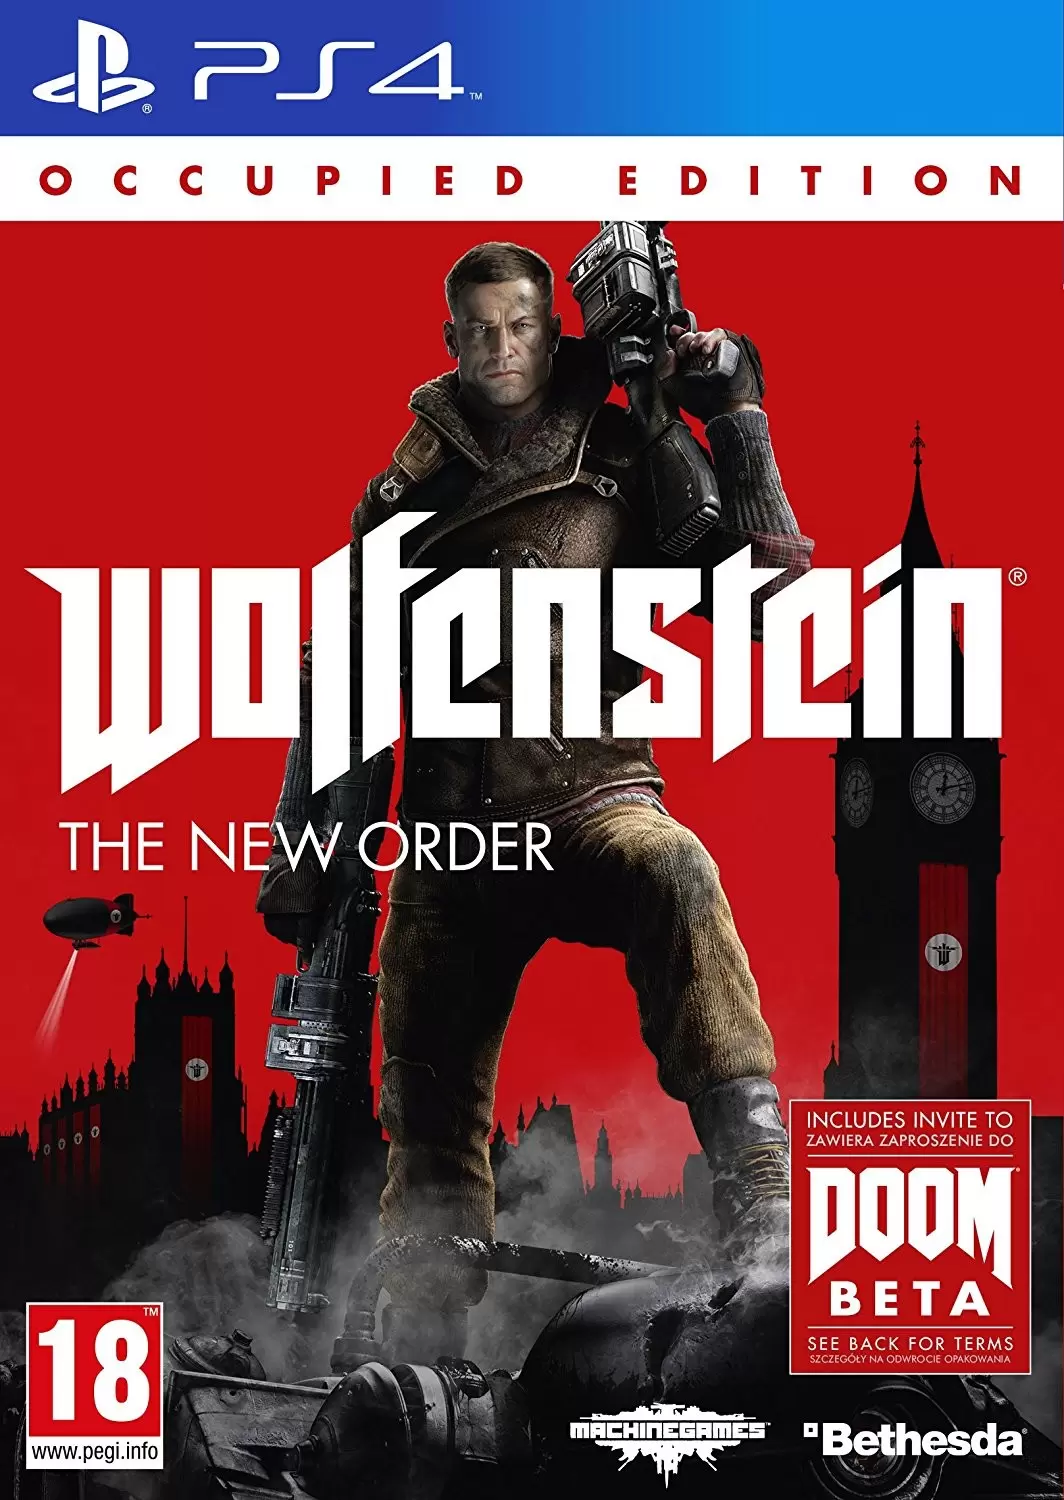 PS4 Games - Wolfenstein The New Order - Occupied Edition